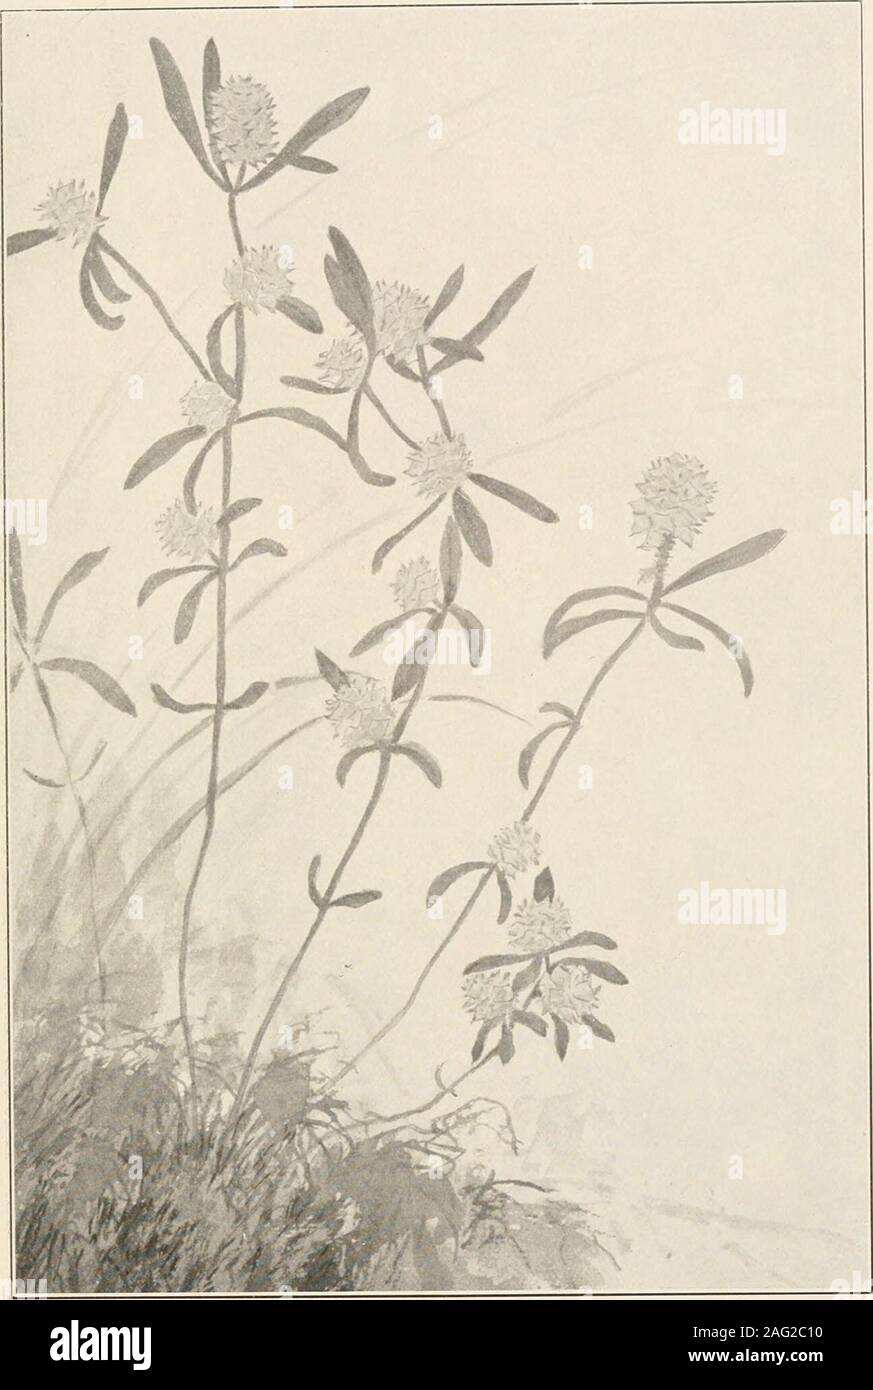 . The plants of southern New Jersey; with especial reference to the flora of the pine barrens and the geographic distribution of the species. Photos by S. r,ruv&gt;-.i, 1. PINK WILD BEAN. Strophostyles umbellata. 2. GROUND-NUT. Apios apios. N. J. Plants. PLATE LXXIII.. From Painting by H. E. Stone. CROSS-LEAVED MILKWORT. Polygala cruciata. N. J. Plants. PLATE LXXIV. ^^^^^ 5*2 Stock Photo